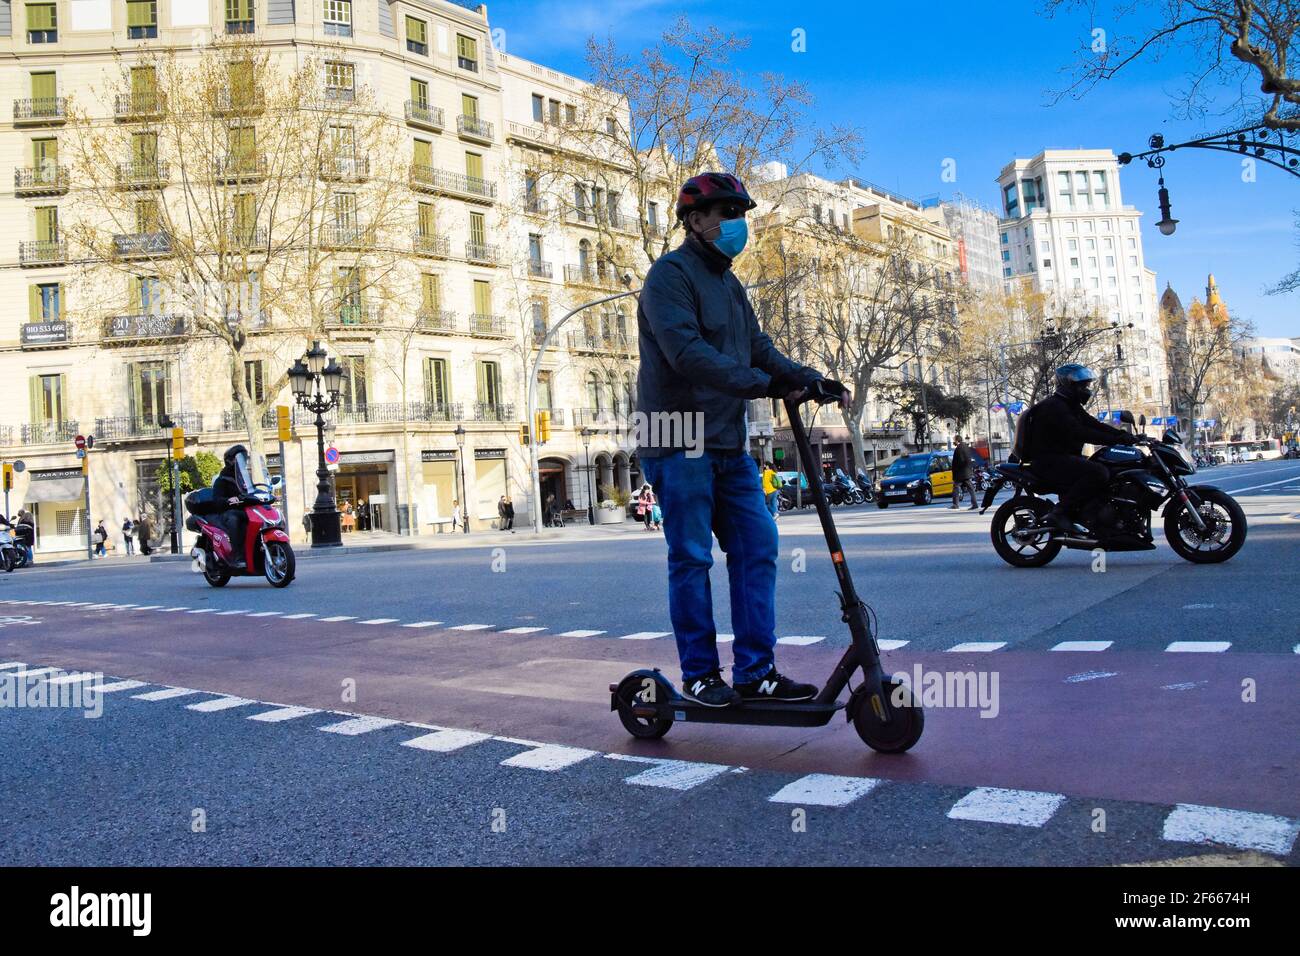 electric, scooter, man, riding, street, city, urban, view, scene,  cityscape, one, lane, barcelona, catalonia, spain, outdoor, buildings,  silhouette Stock Photo - Alamy